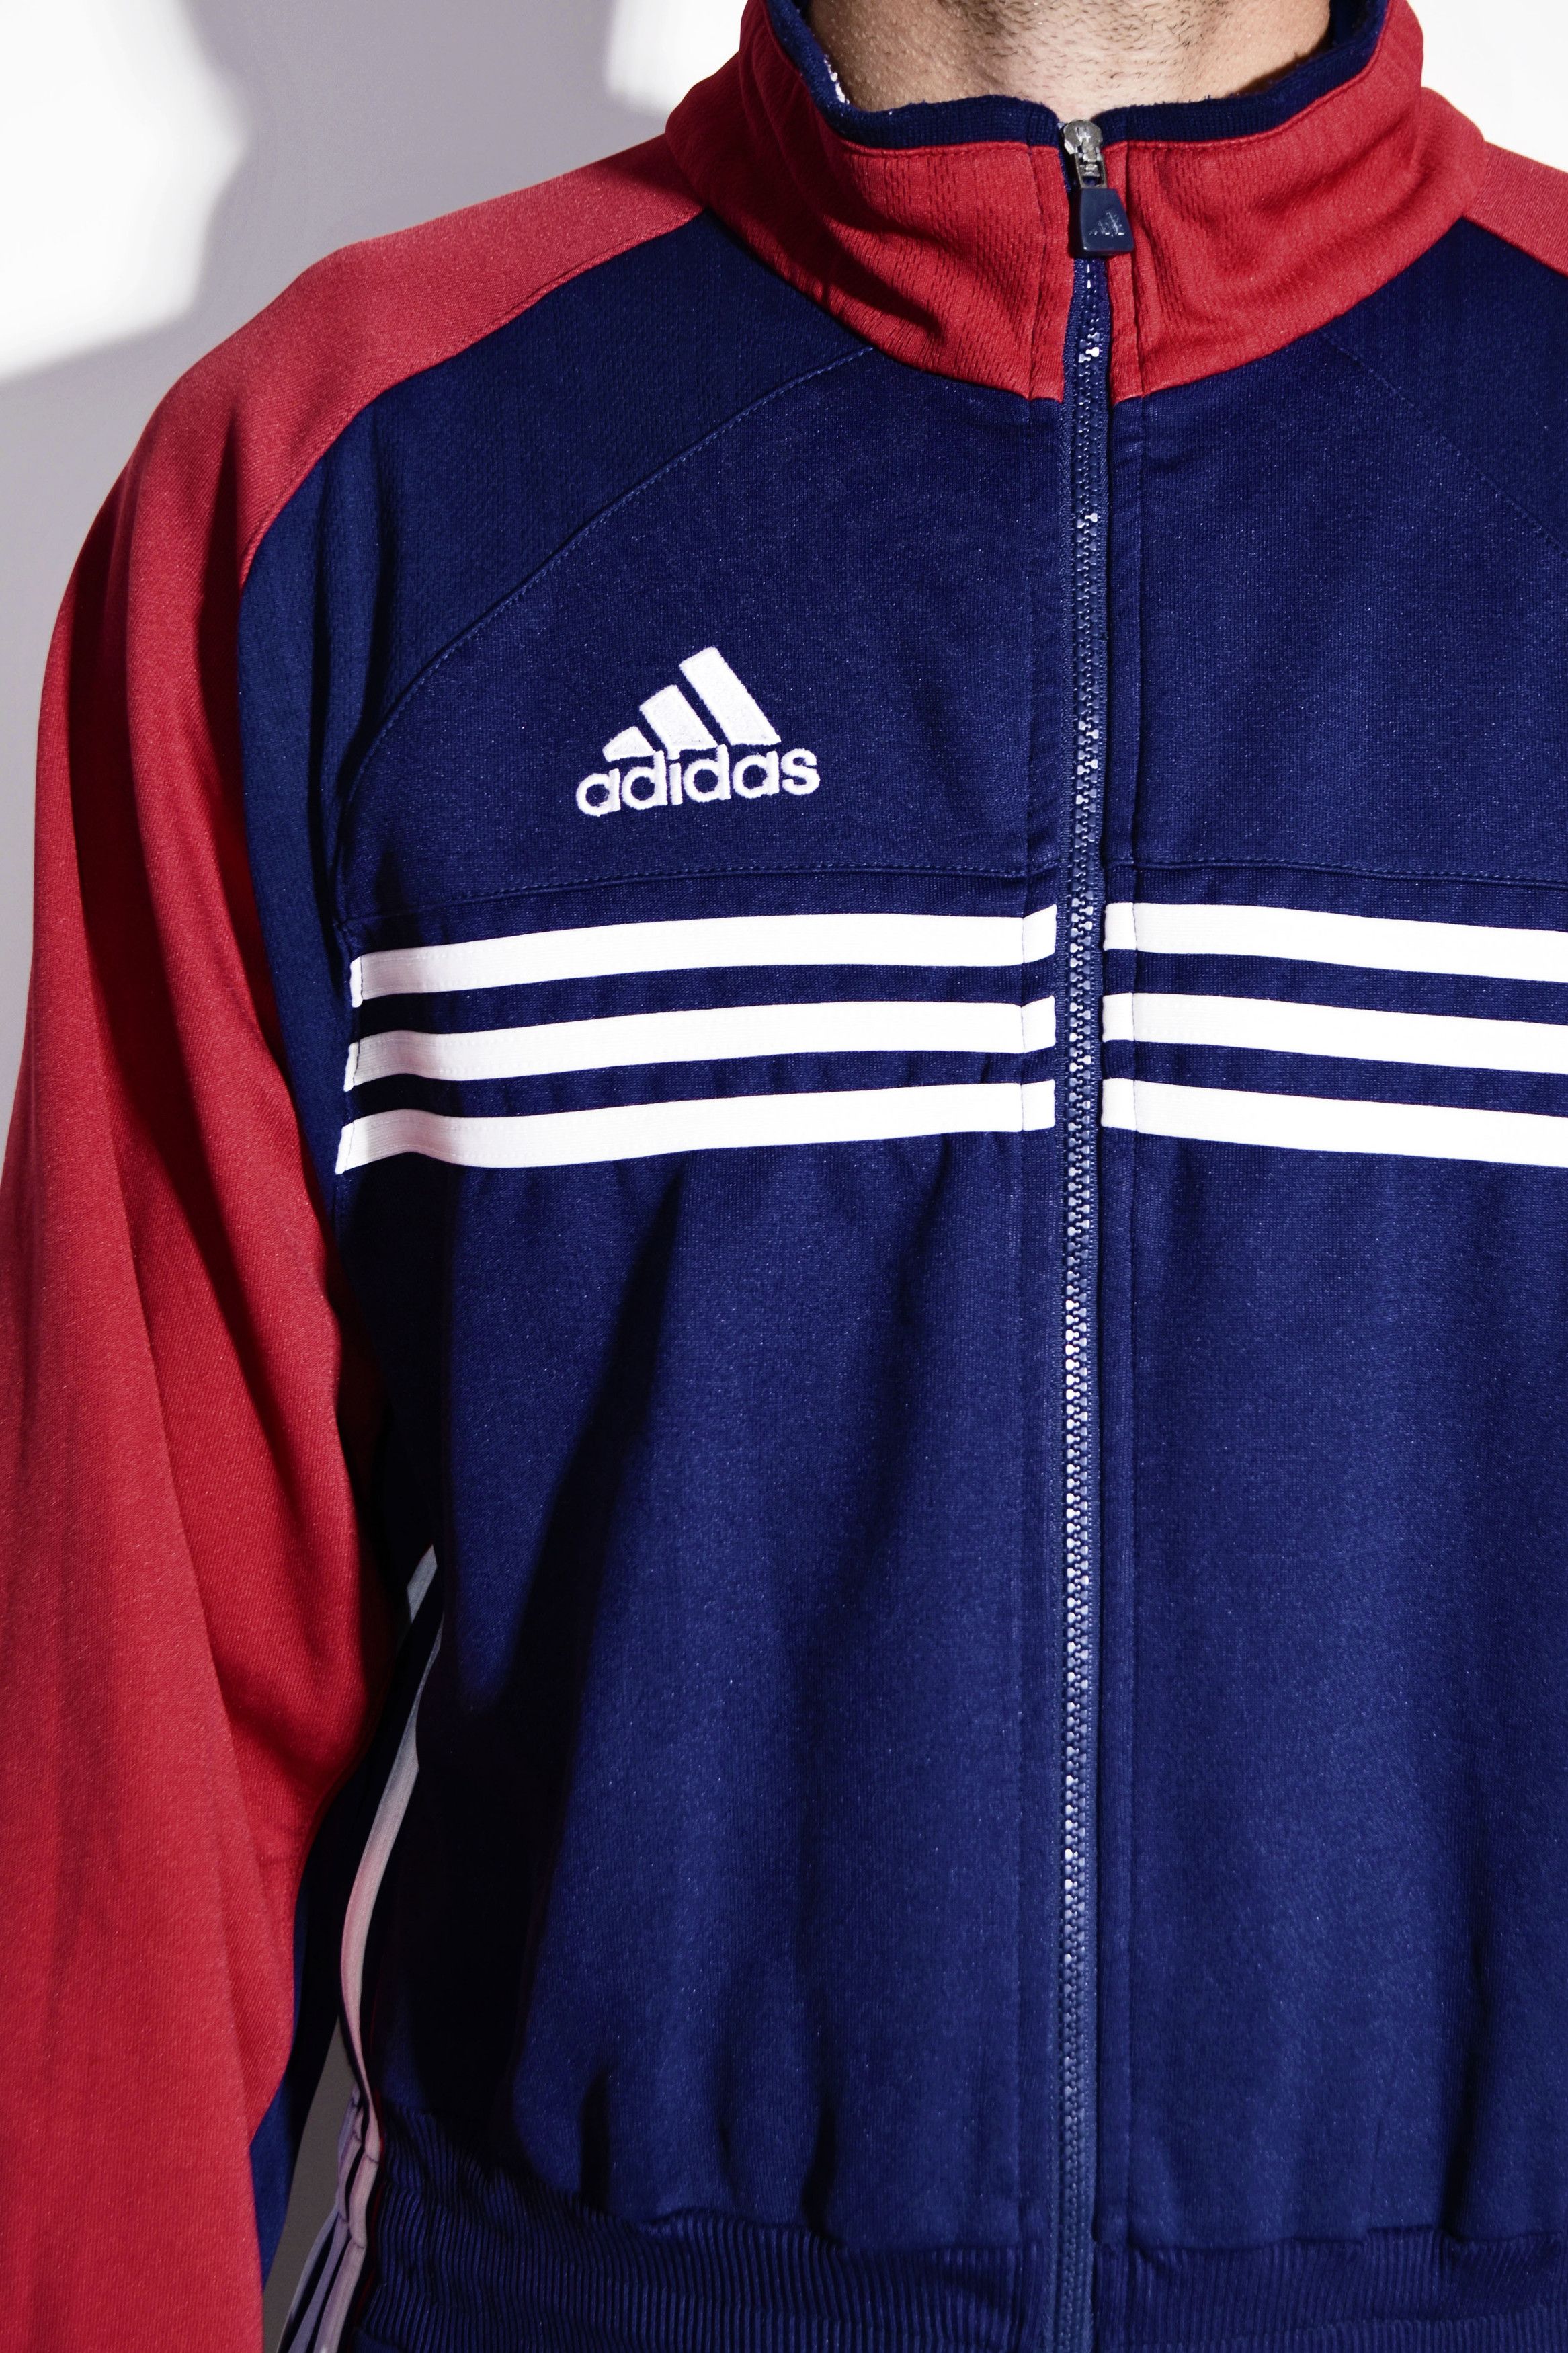 Adidas Vintage men sport onesie ADIDAS | 80s retro Old School overall full coverall jumpsuit sweatsuit one part piece tracksuit blue red | Large Size US 34 / EU 50 - 5 Preview